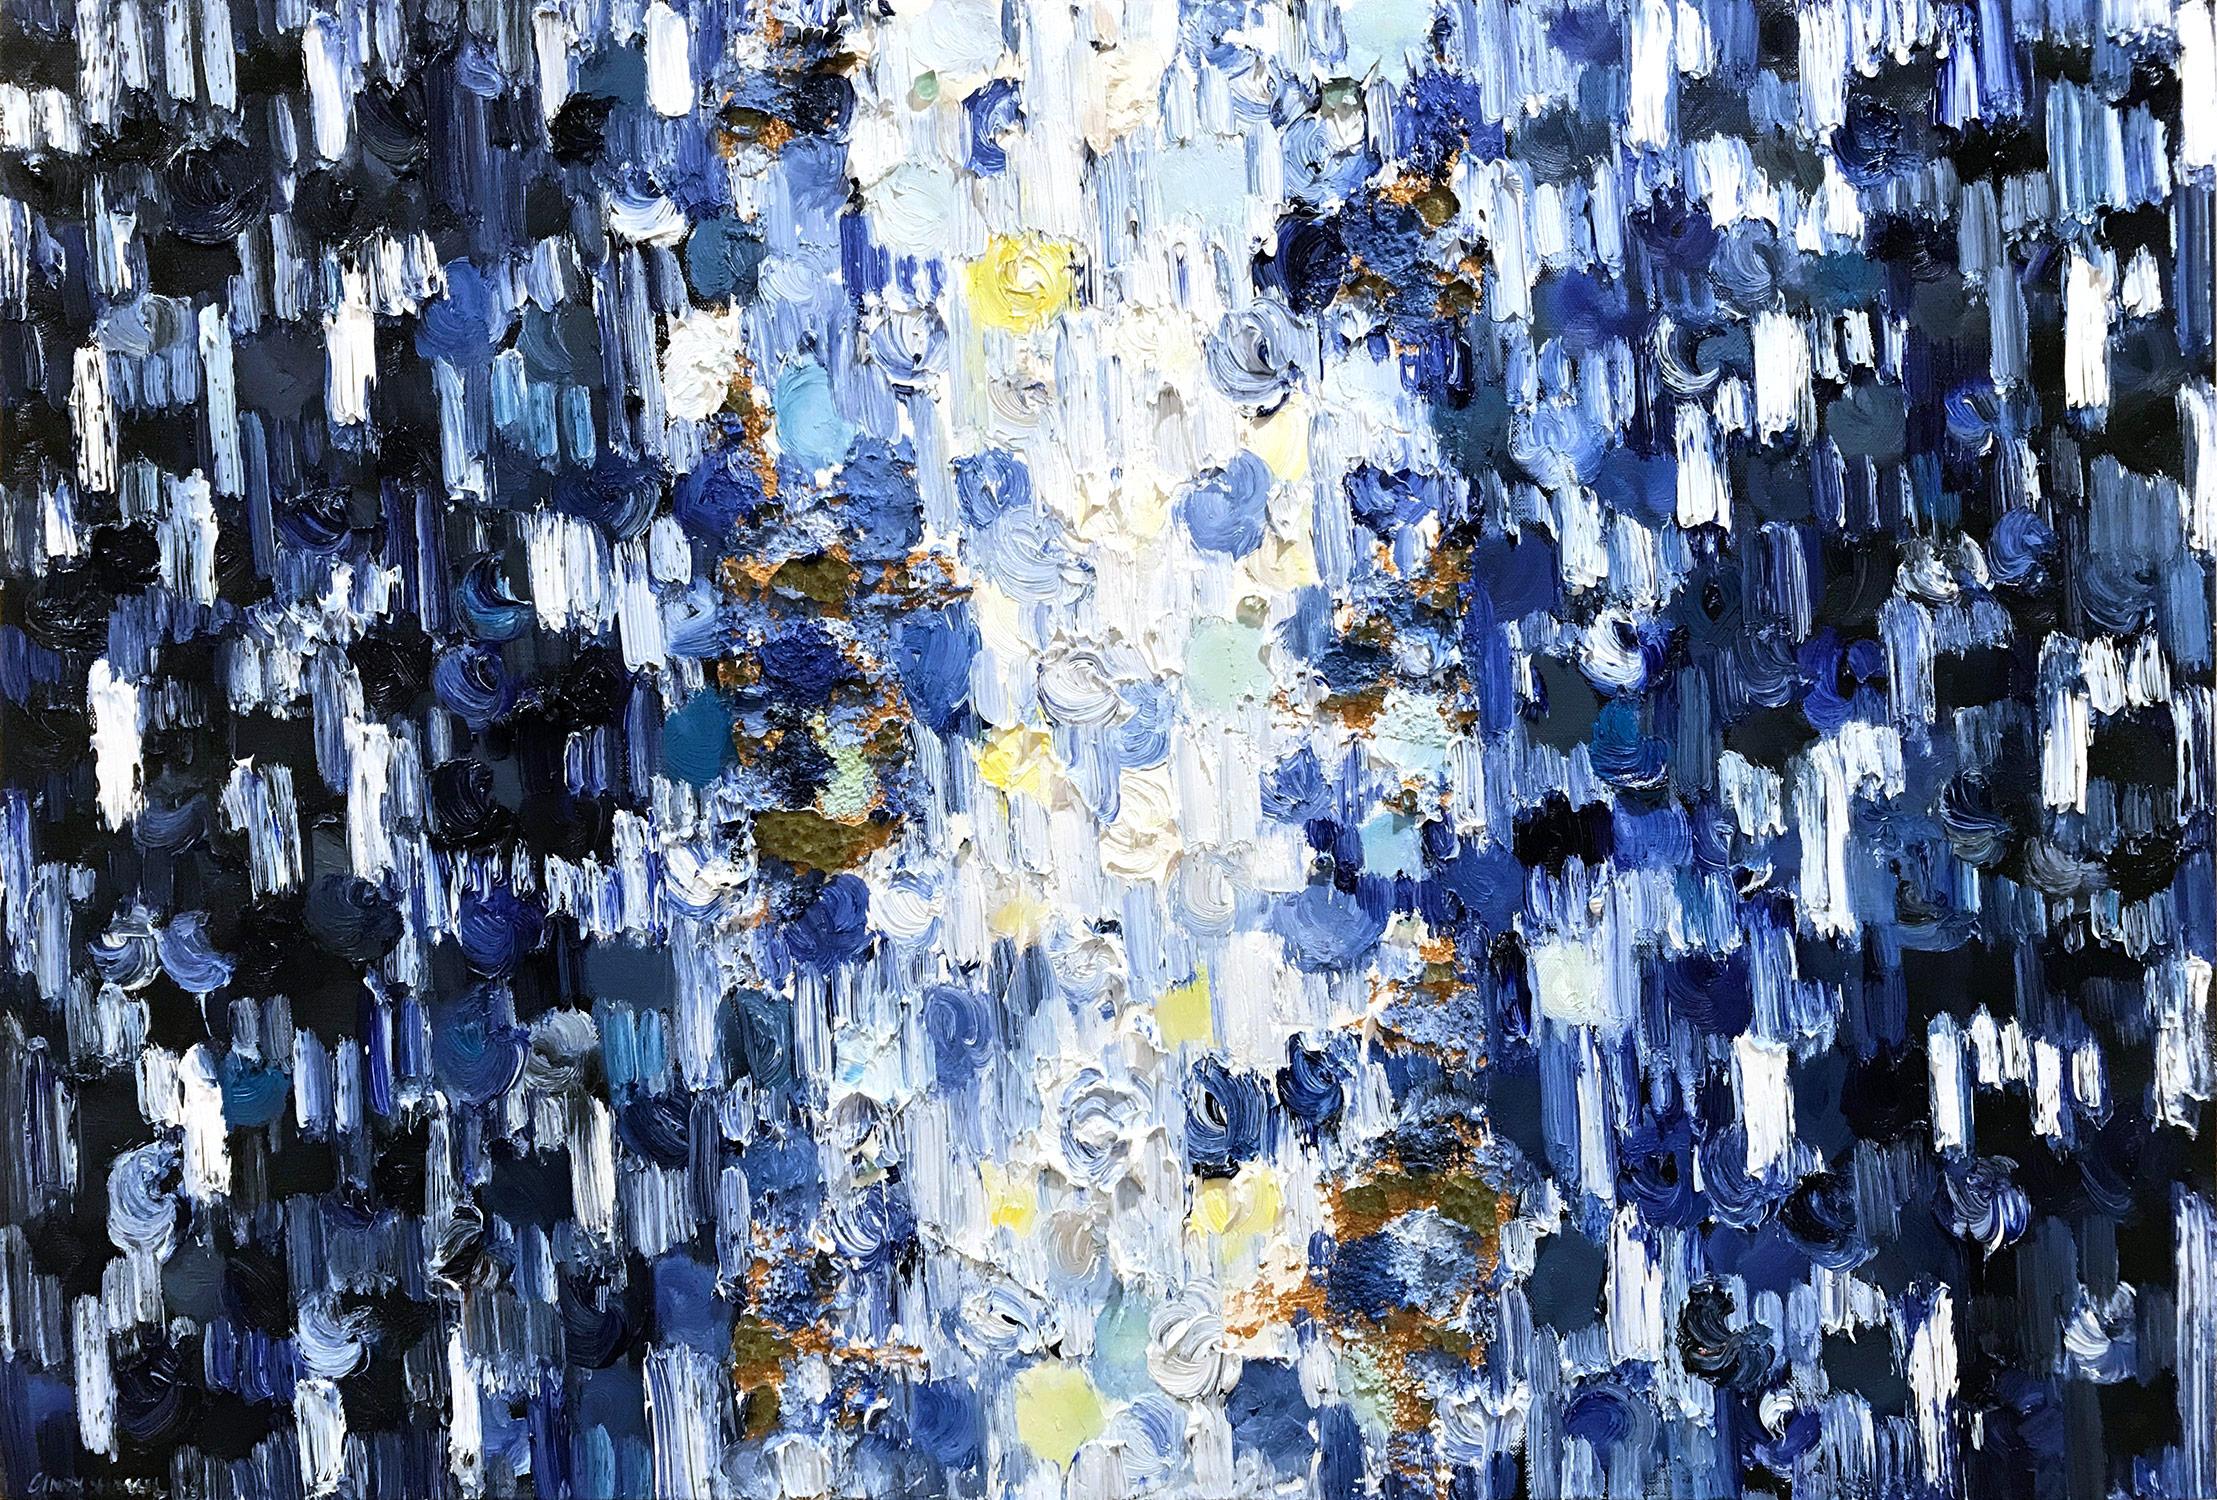 "Dripping Dots - Kingston" Blue & Black Gradient Abstract Oil Painting on Canvas